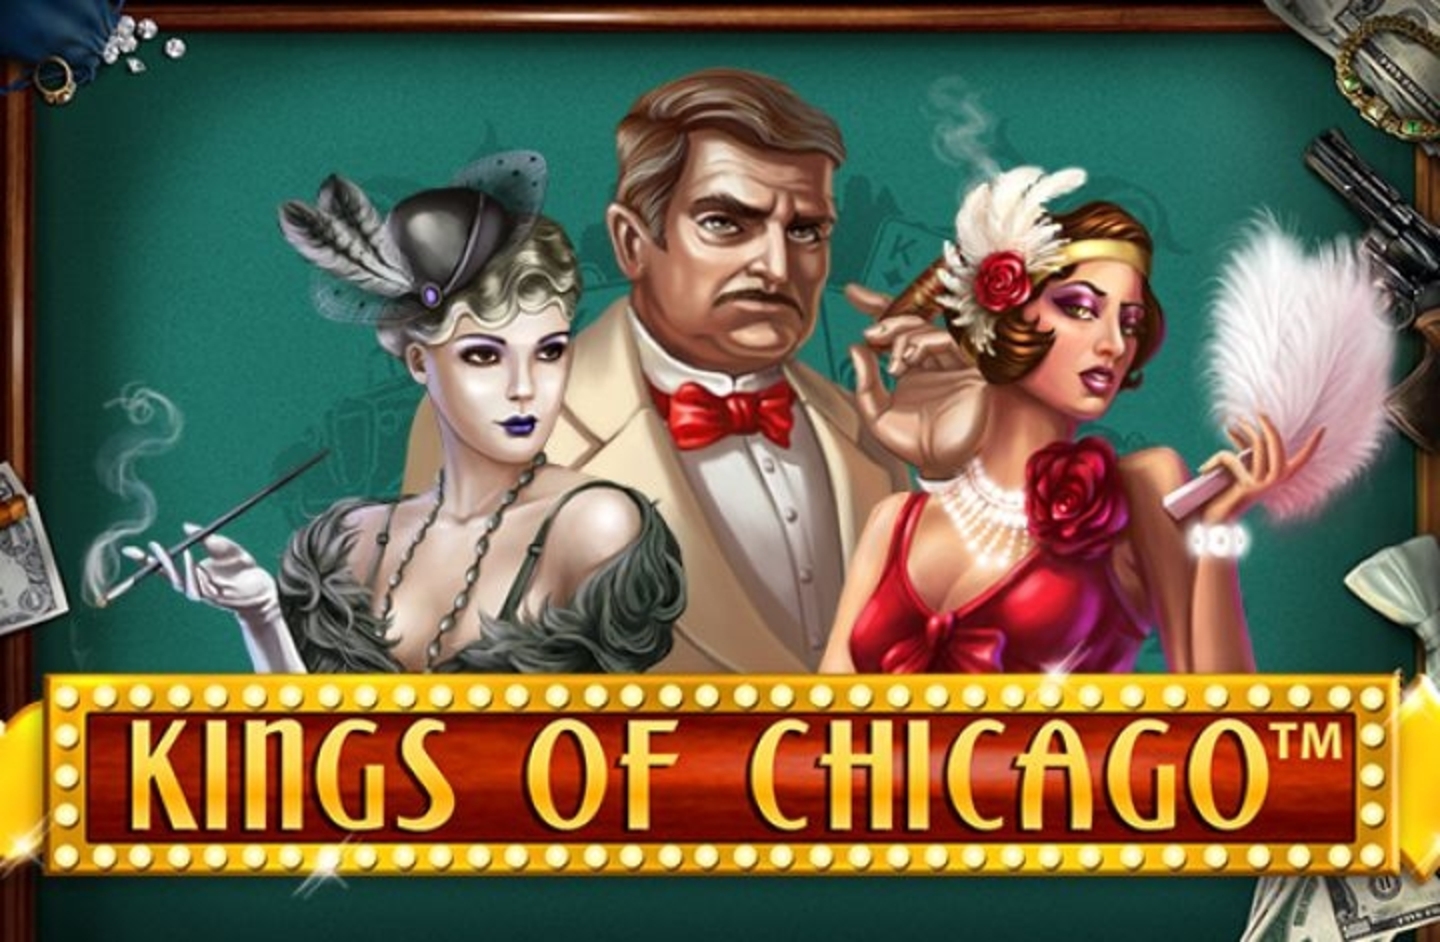 Kings of Chicago demo